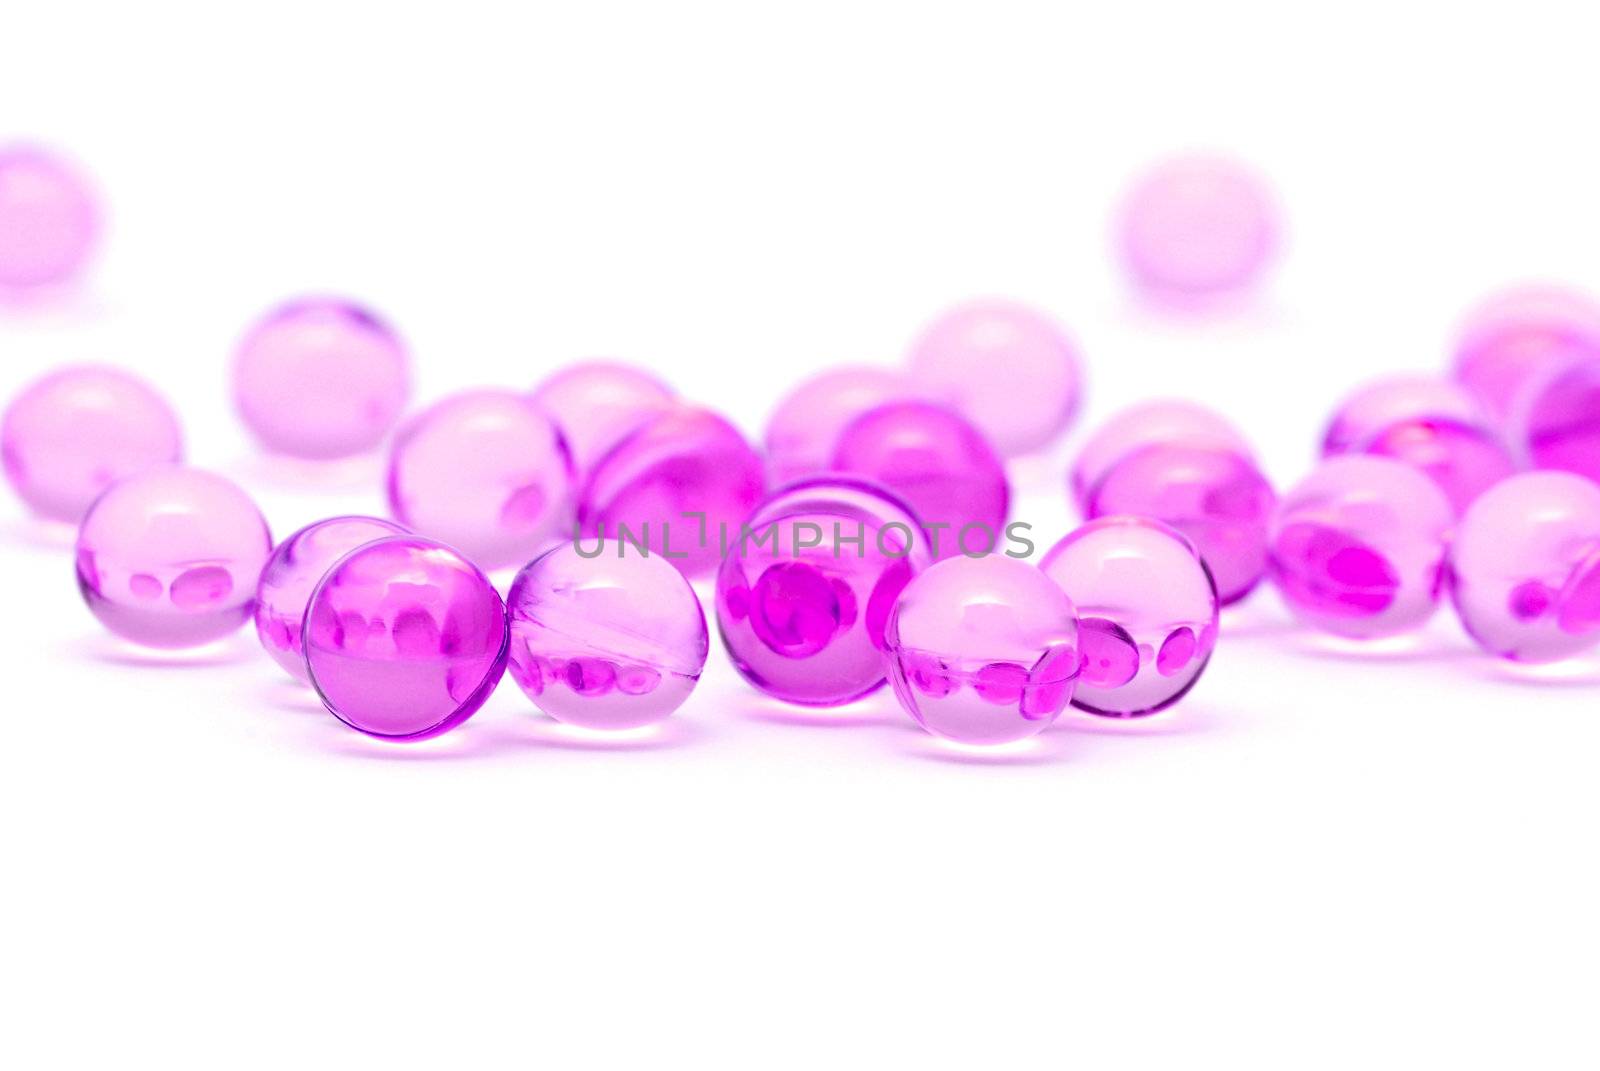 Transparent purple capsules isolated on white